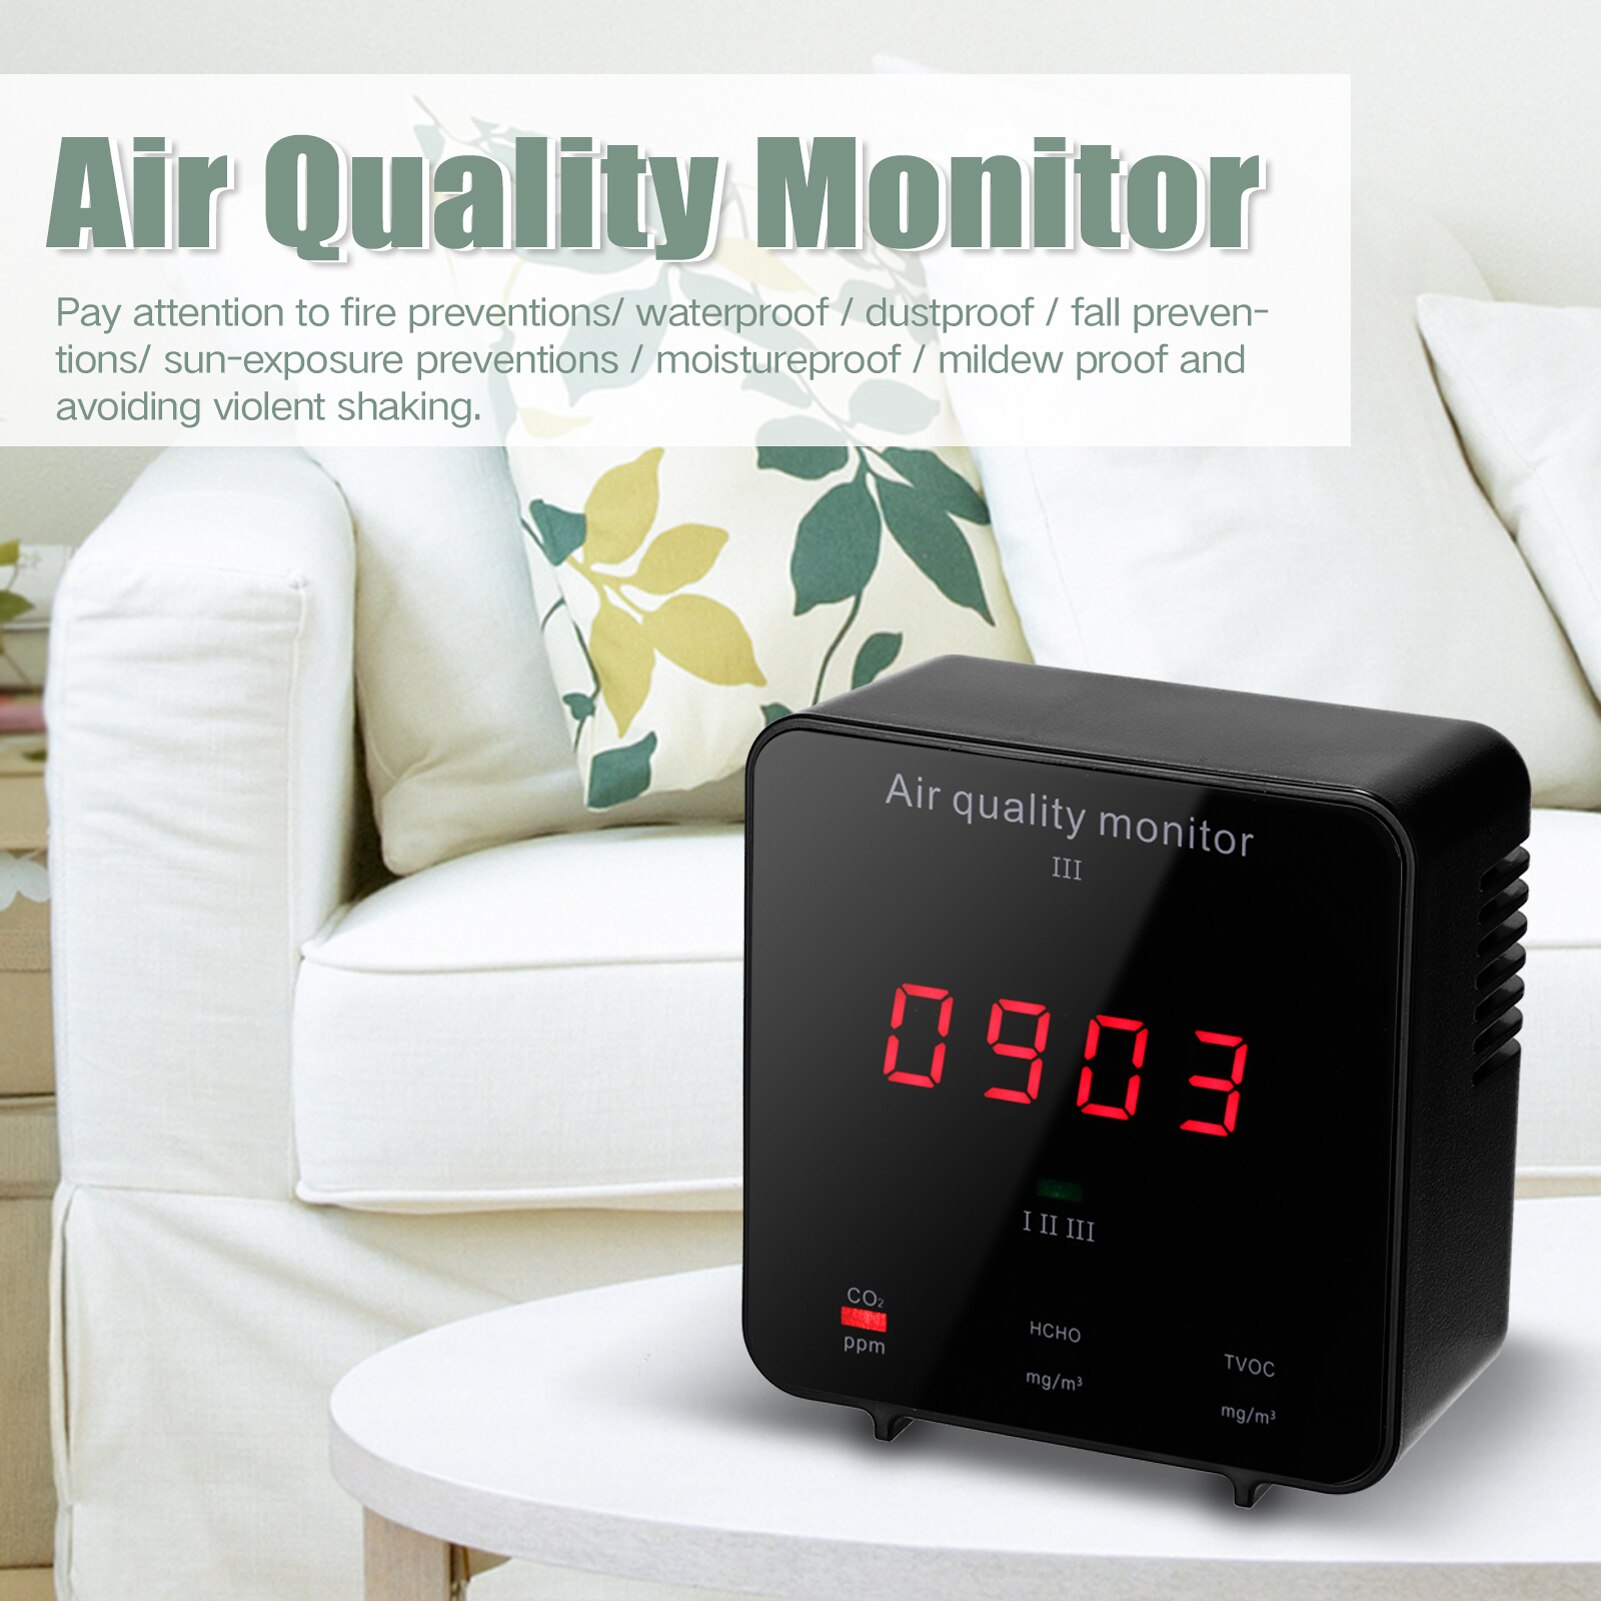 CO2 Meter Tester CO2 Detector Household Air Monitor Carbon Dioxide Formaldehyde TVOC, CO2, AQI, HCHO Detector Analyzer